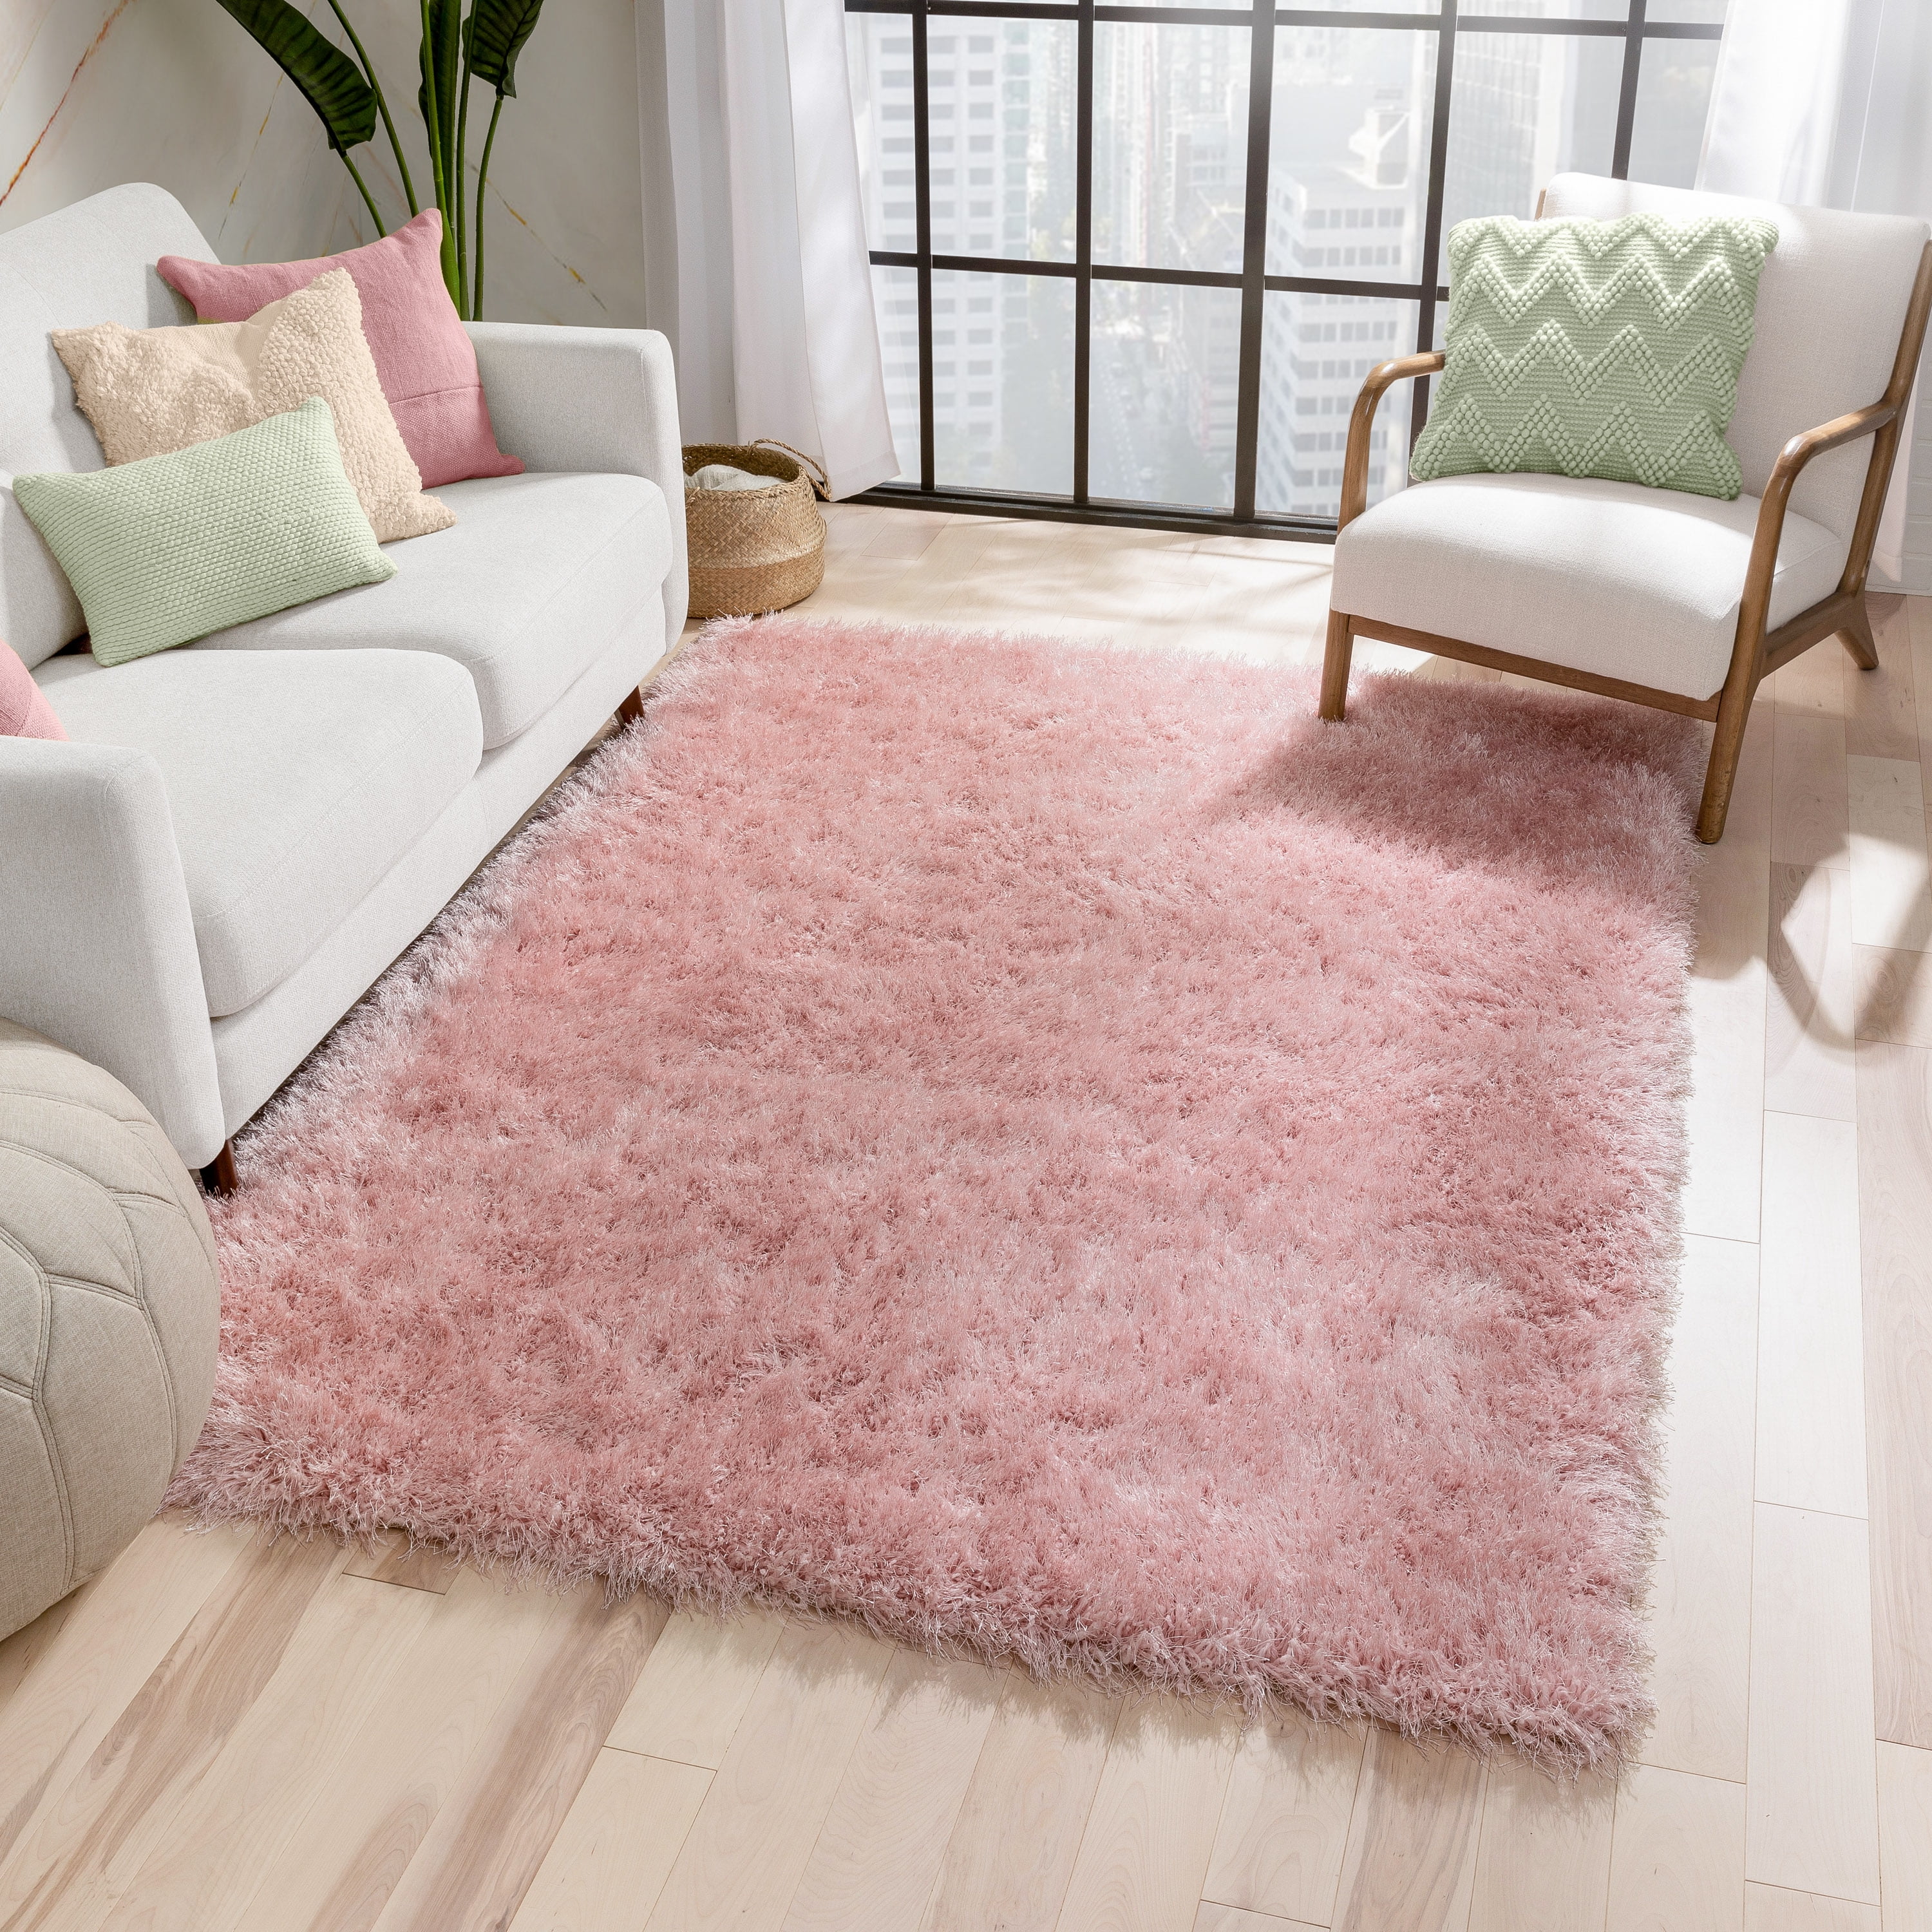 Blush Rose Pink Grey Floor Rug Small Extra Large Sizes Thick Soft Pile Mat Cheap 